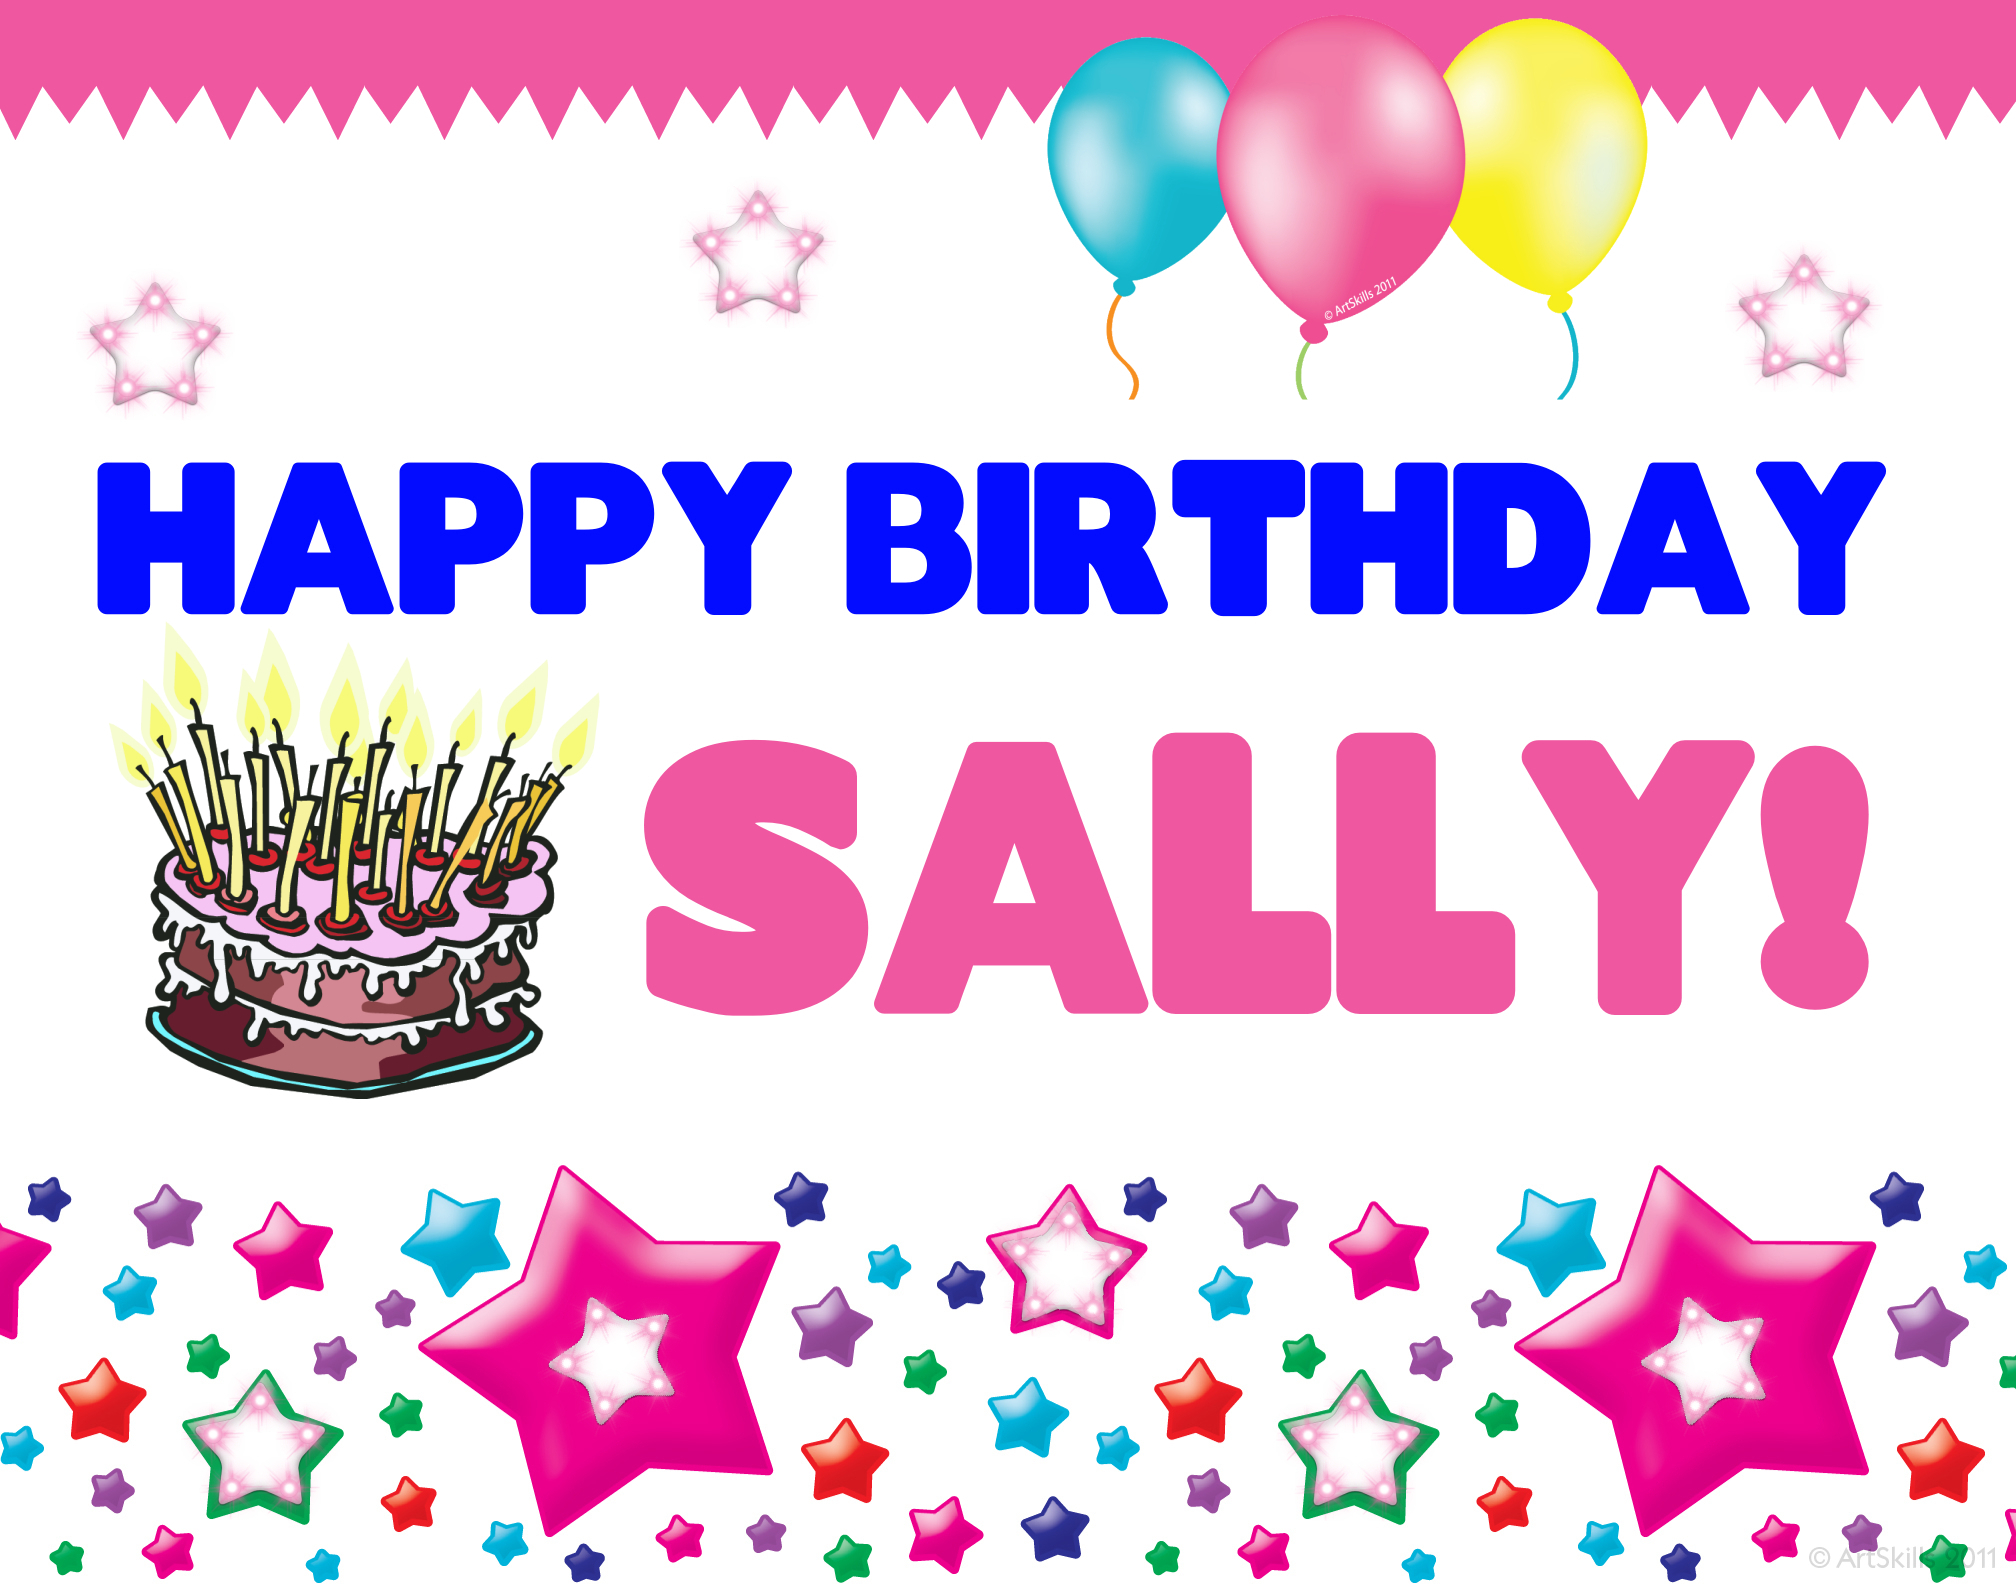 artskills.com/gallery/poster-categories/events-and-signs/happy-birthday-sal...